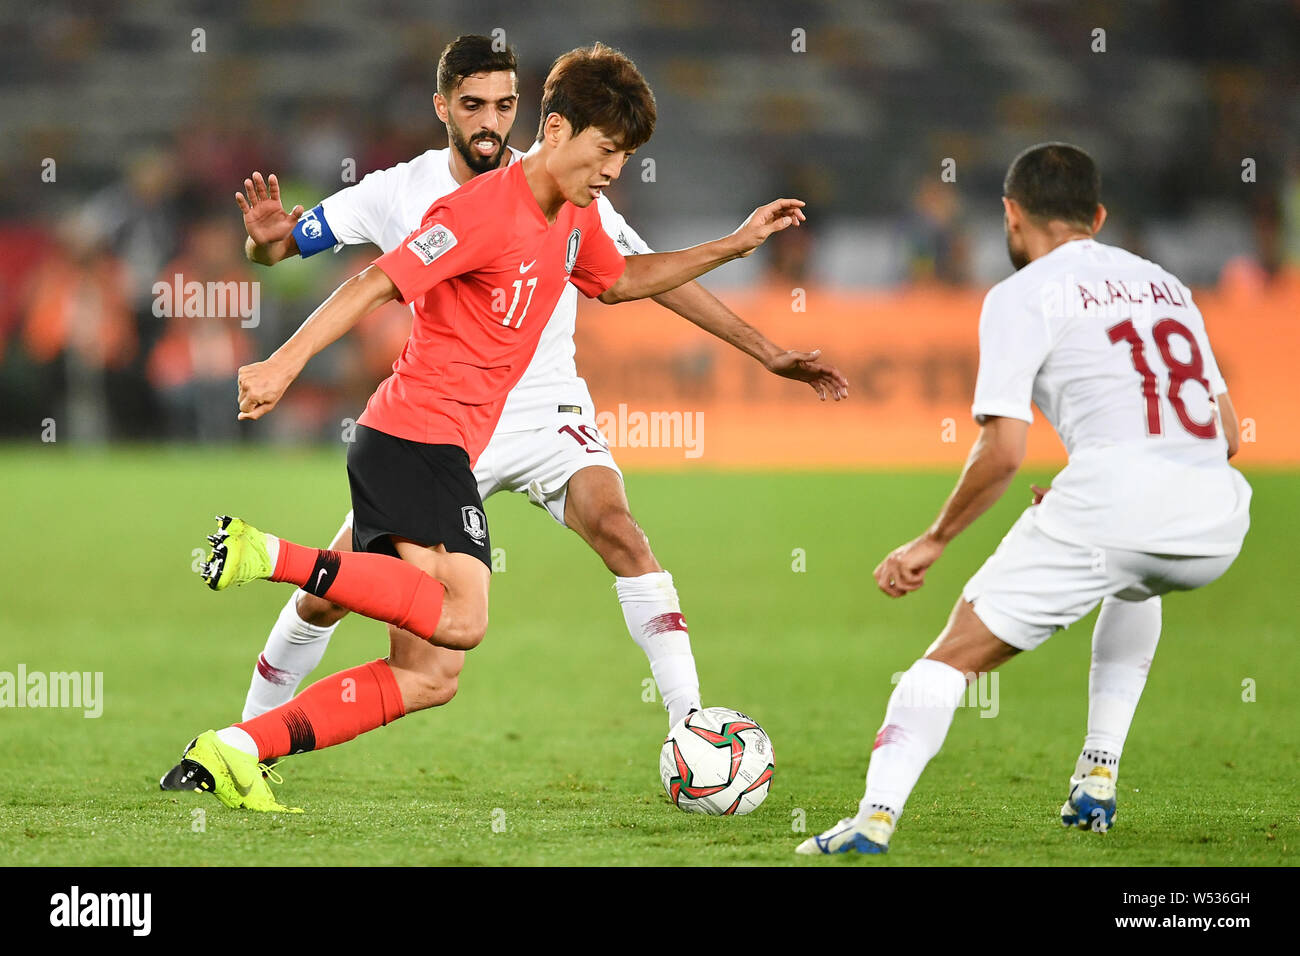 Lee Chung-yong, center, of South Korea national football team passes the ball against players of Qatar national football team in their quarter-final m Stock Photo